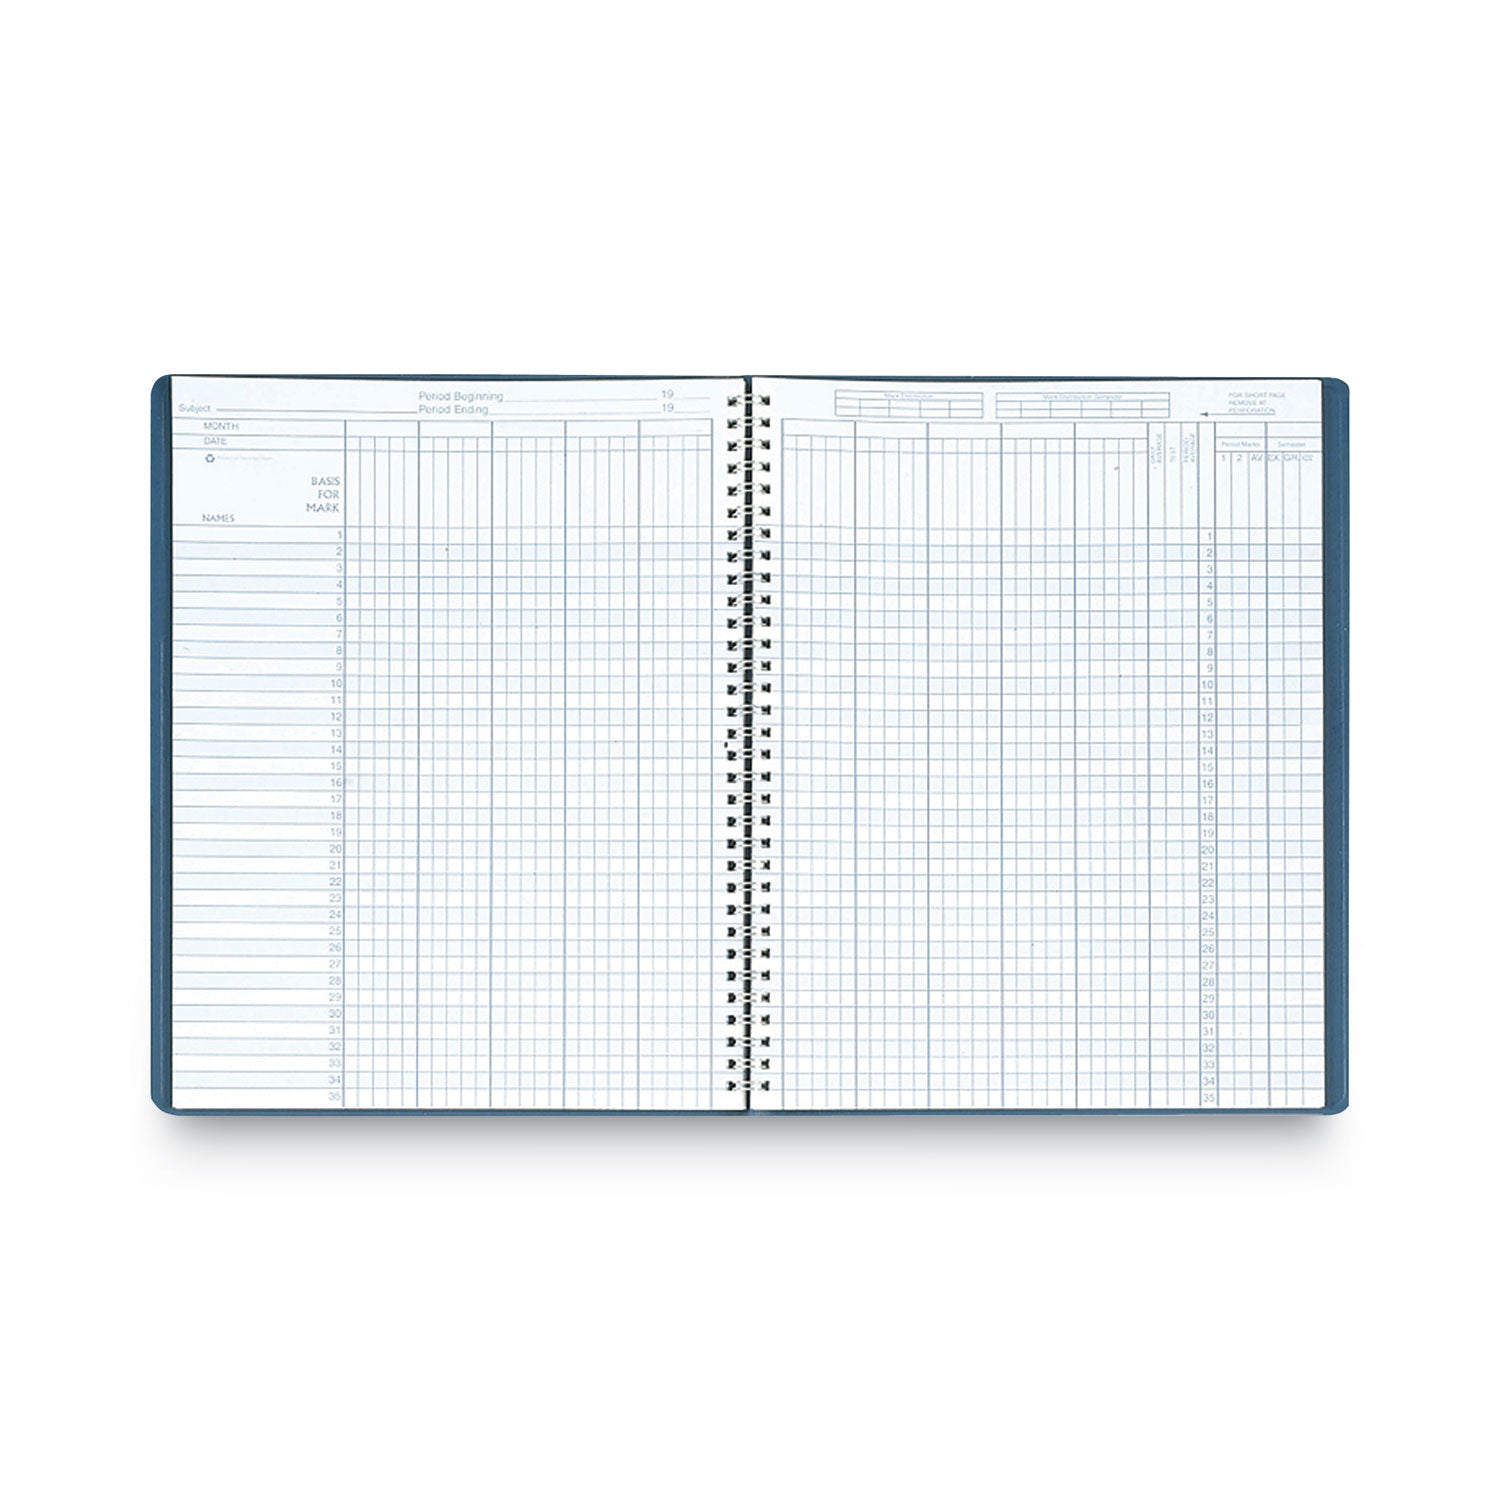 Recycled Class Record Book, 9-10 Week Term: Two-Page Spread (35 Students), Two-Page Spread (8 Classes), 11 x 8.5, Blue Cover - 